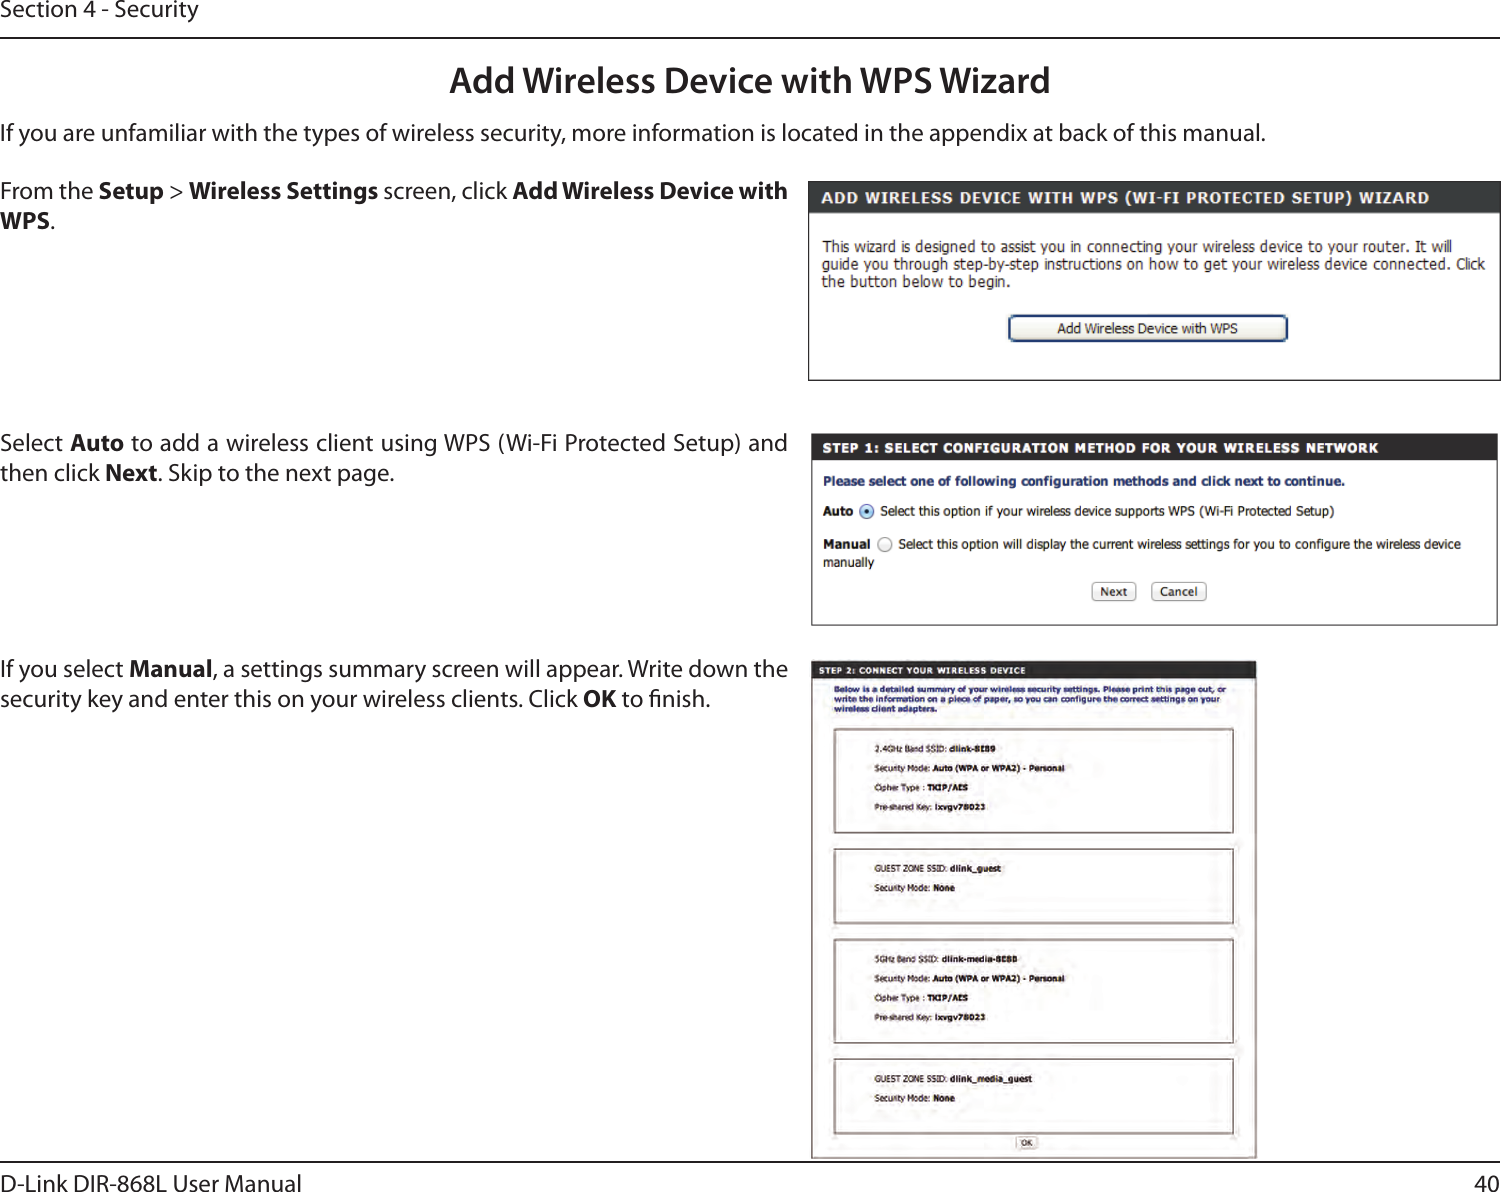 40D-Link DIR-868L User ManualSection 4 - SecurityFrom the Setup &gt; Wireless Settings screen, click Add Wireless Device with WPS.Add Wireless Device with WPS WizardIf you select Manual, a settings summary screen will appear. Write down the security key and enter this on your wireless clients. Click OK to nish.Select Auto to add a wireless client using WPS (Wi-Fi Protected Setup) and then click Next. Skip to the next page. If you are unfamiliar with the types of wireless security, more information is located in the appendix at back of this manual.